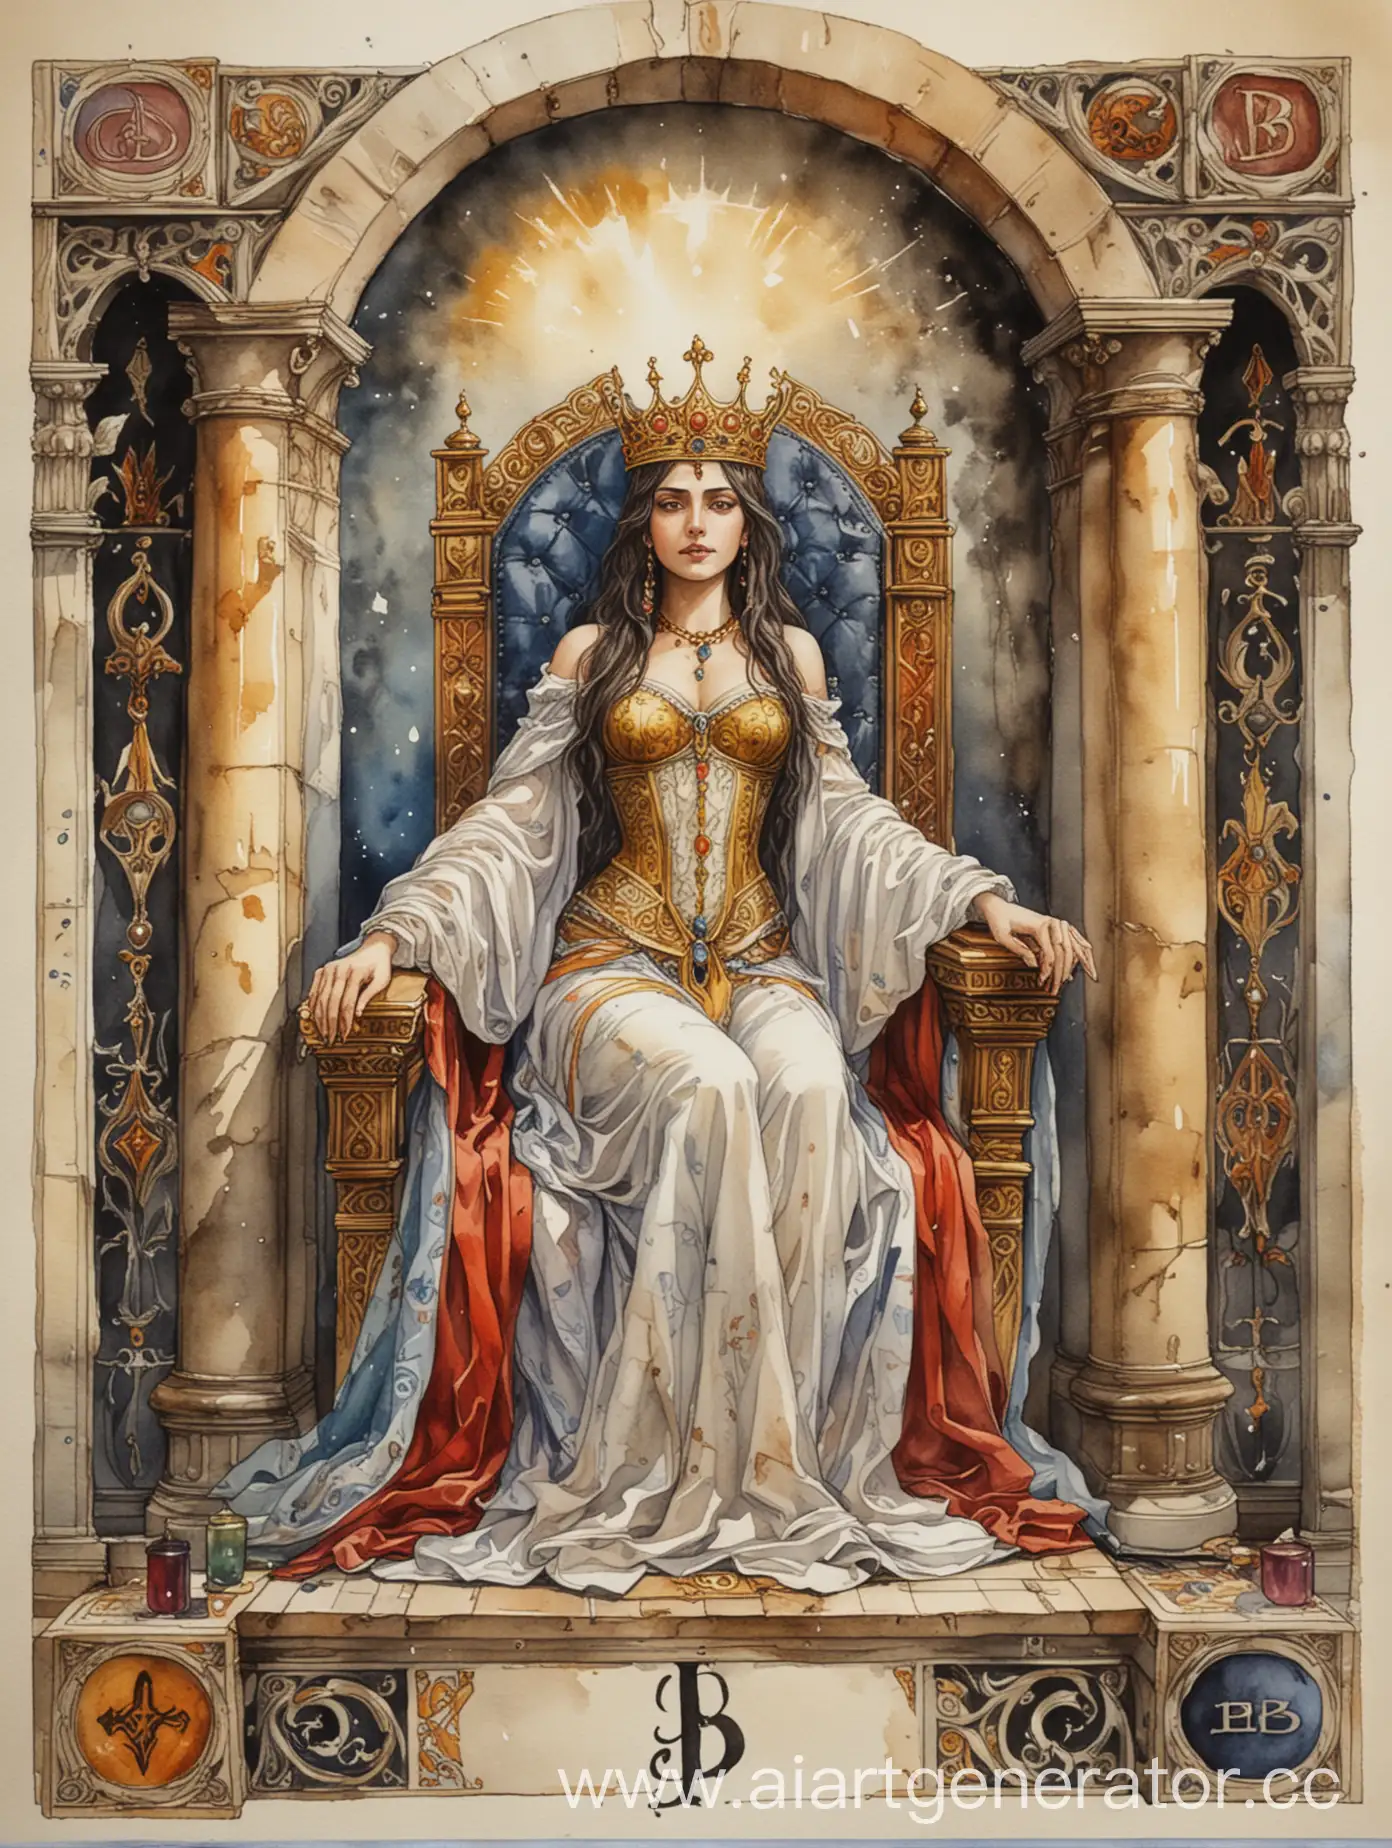 Watercolor-Tarot-Card-Arcanum-Priestess-with-J-and-B-Letters-and-Open-Book